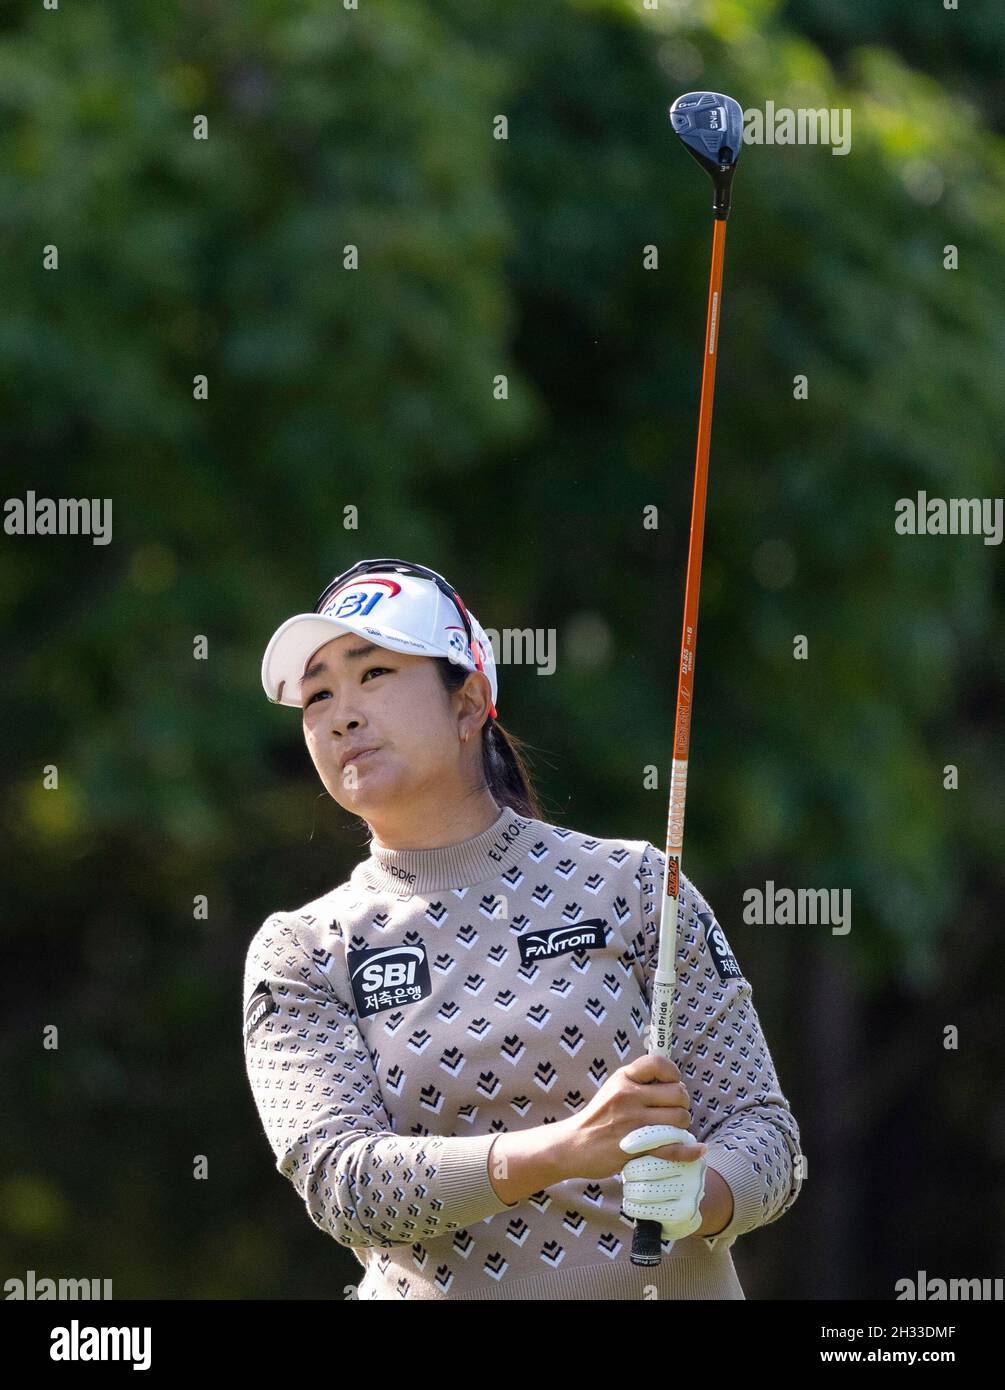 24 October 2021 - Busan, South Korea : Kim A-Lim of South Korea plays from a tee shot 5th hall during their final round of the LPGA BMW Ladies Championship 2021 at LPGA International Busan in Busan, South of Seoul, South Korea on October 24, 2021. (Photo by: Lee Young-ho/Sipa USA) Stock Photo